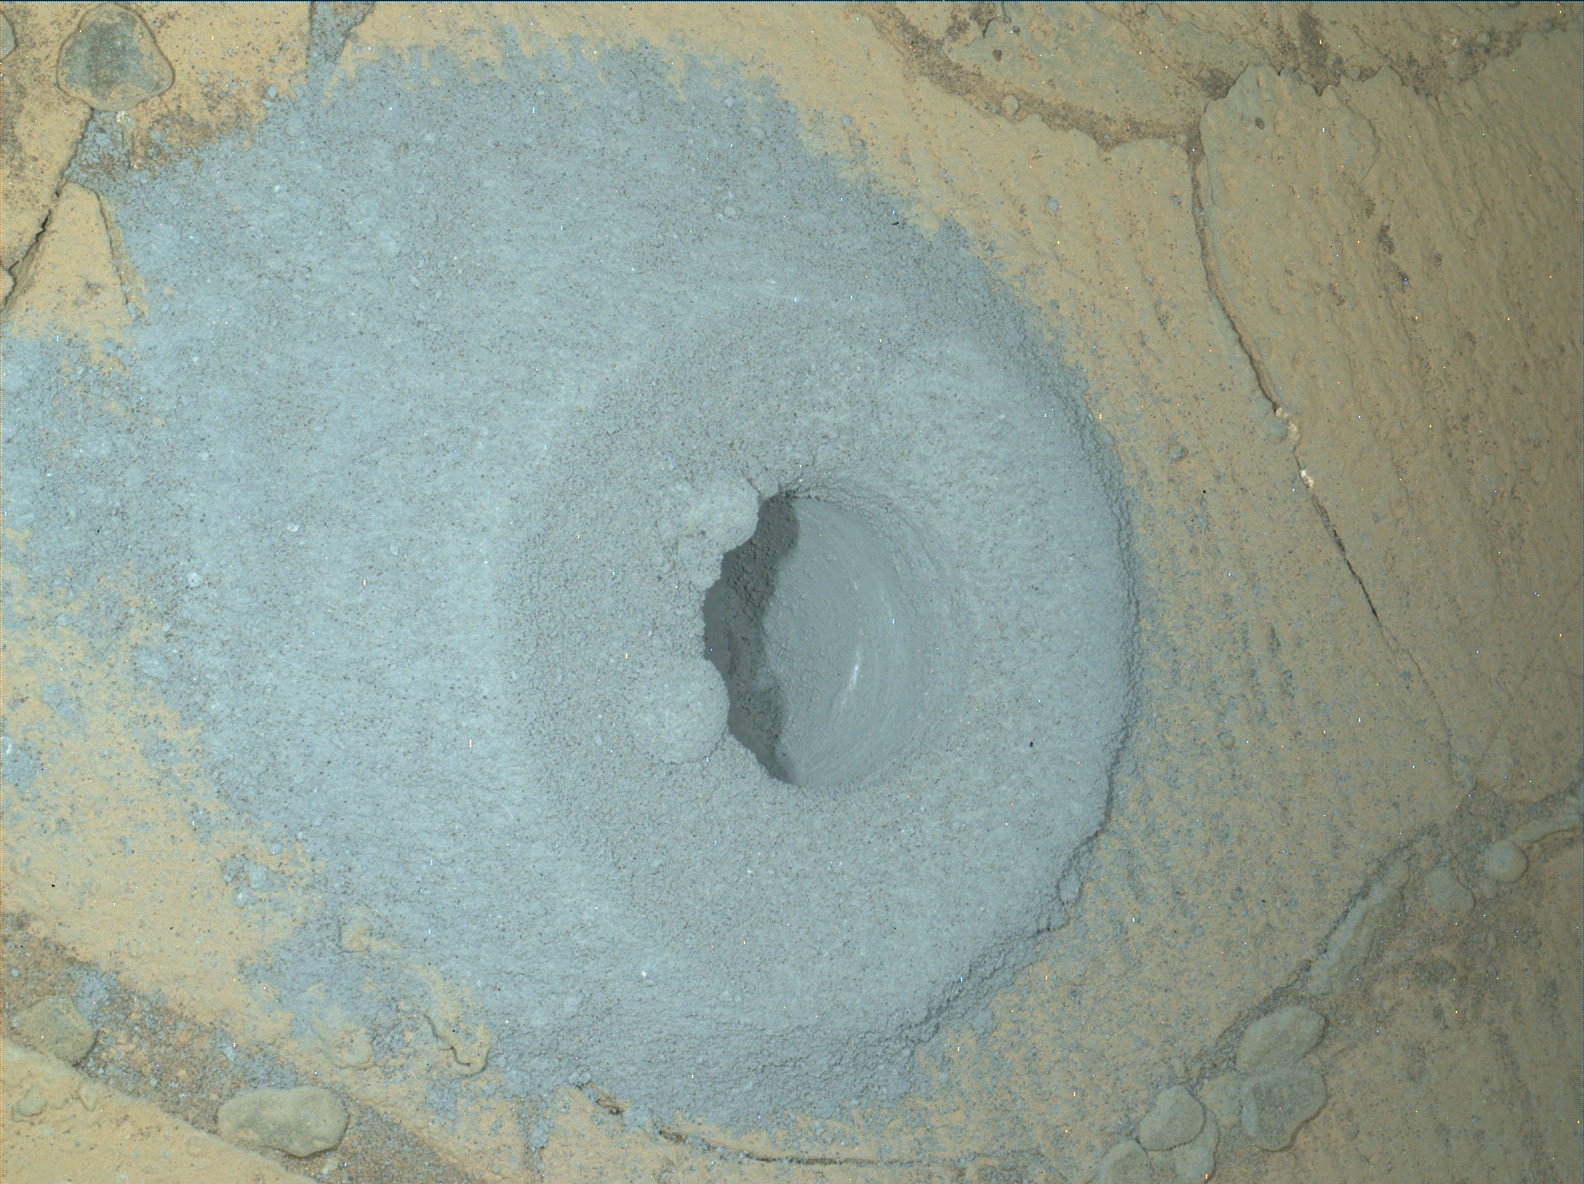 Nasa's Mars rover Curiosity acquired this image using its Mars Hand Lens Imager (MAHLI) on Sol 911